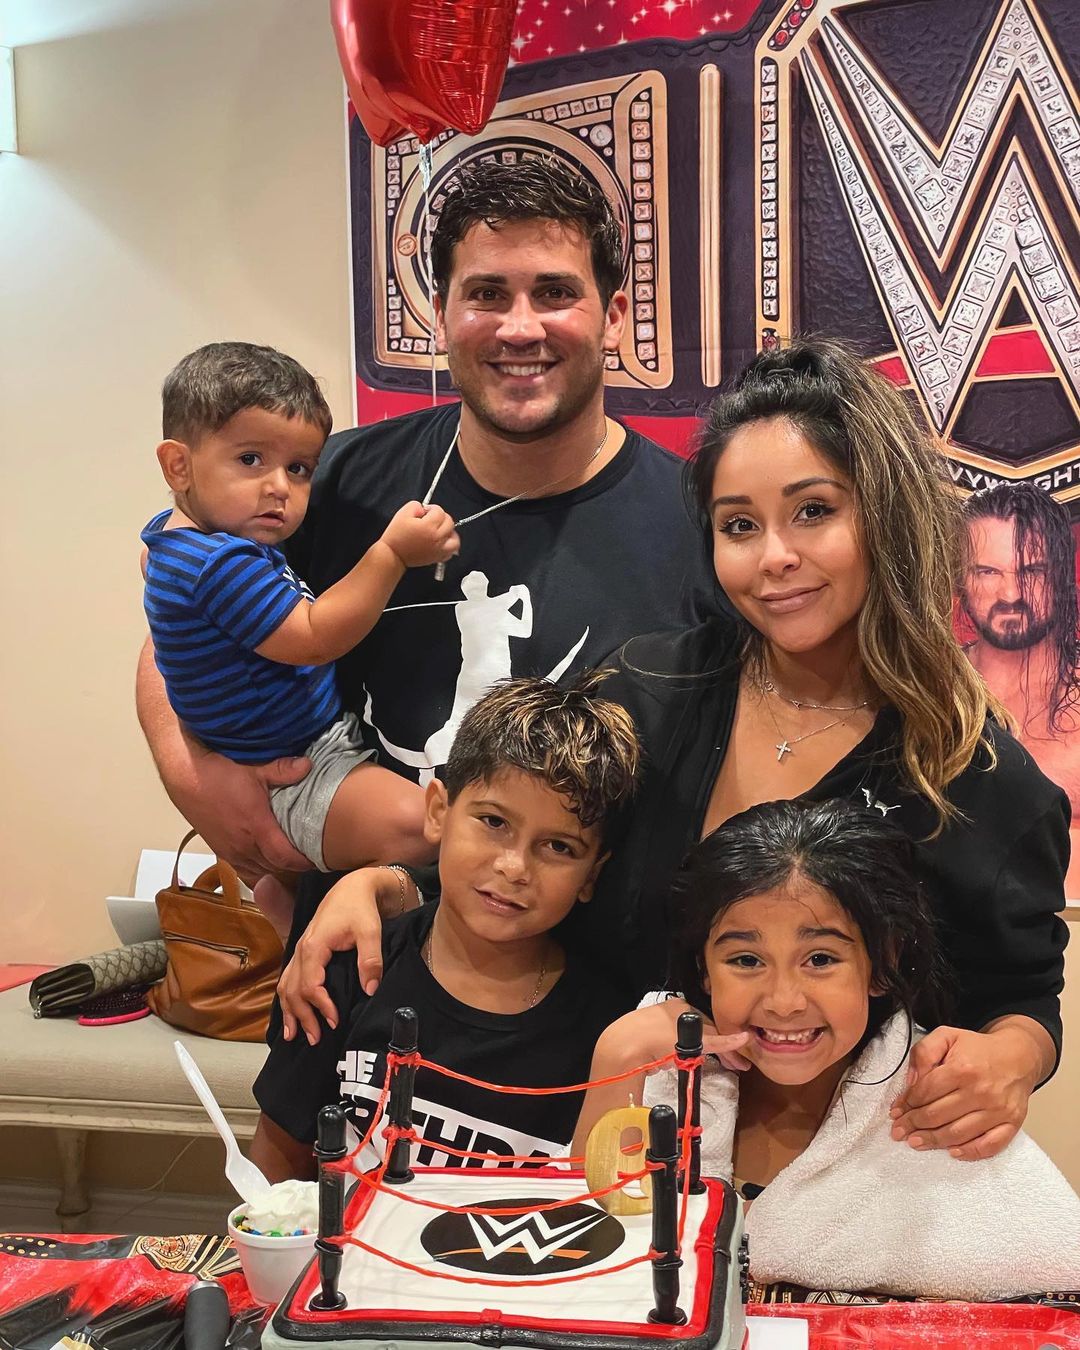 Snooki and her husband Jionni already have three children together